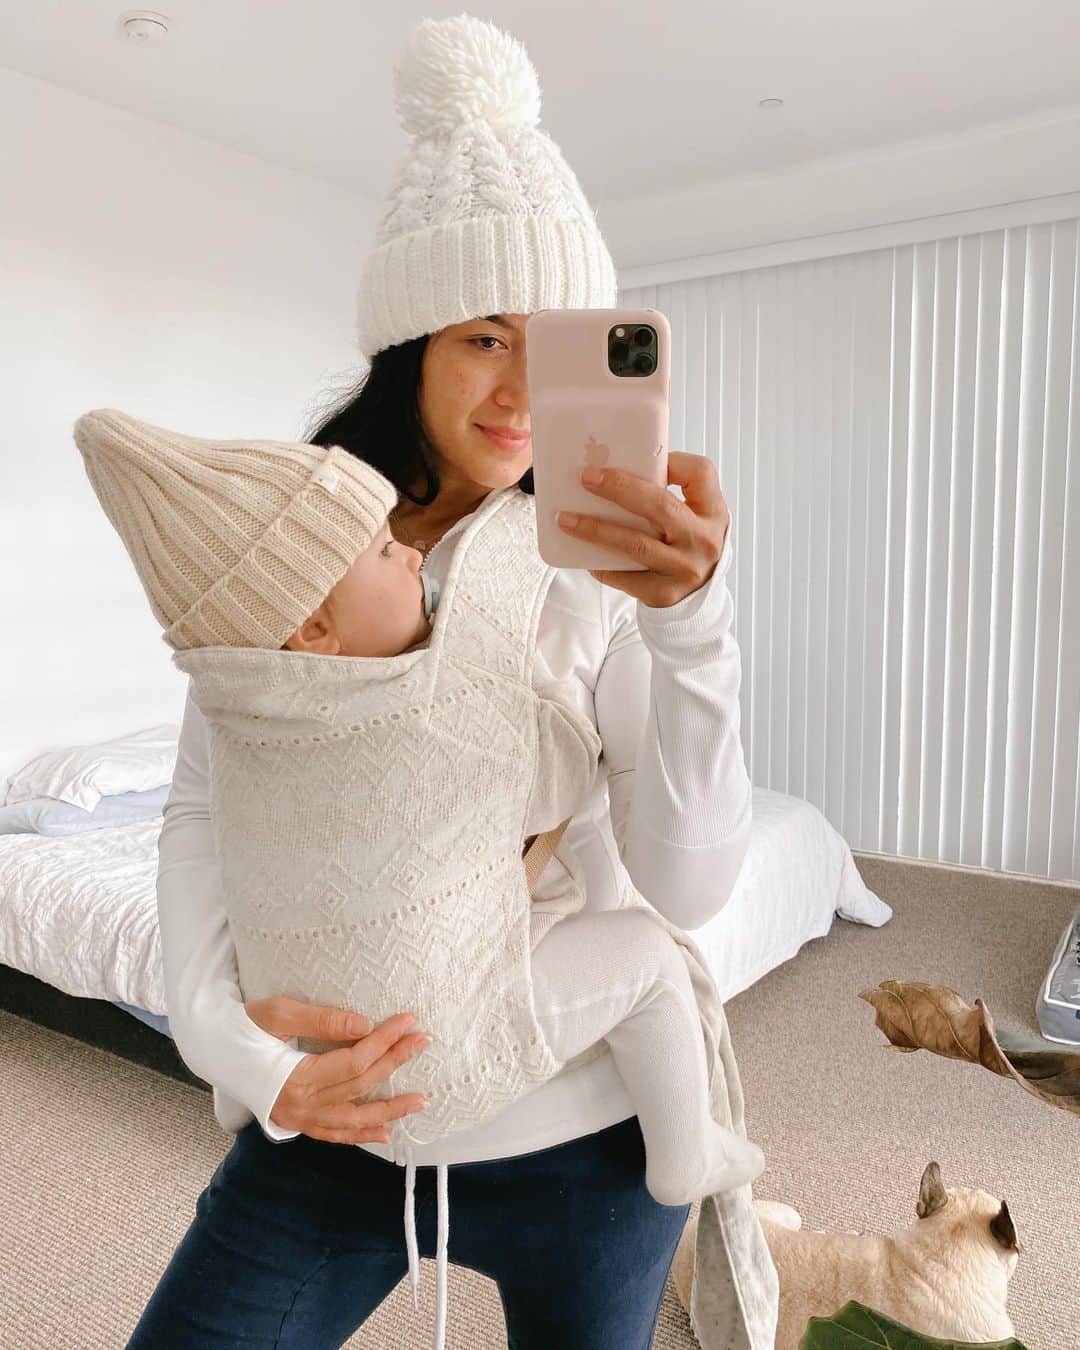 Bianca Cheah Chalmersのインスタグラム：「I don’t know what’s wrong with him. These past few days he’s been having these 10 mins episodes of hysterically crying and severely arching his back. The other night, he woke up crying, I then brought him outside on the lounge with us, and his little body just flipped out in my arms in full arching mode. So I lay him down on the floor, turned him on his side to soothe him, and his little body kept doing the same thing, yet he was pushing the floor away from him. He cries for me to pick him up, so I hold him rocking him saying everything’s ok, and mummy’s here, but he does the same, arching his back crying hysterically like something is on him or he’s trying to get away from something. After about ten mins it stops and he becomes super clingy and won’t let me put him down. He has no fever and he’s eating fine. So I’m not sure if he’s just frustrated or in pain from his teeth. If this is part of a regression, then wow this is absolutely horrible for him to experience. We are seeing his doctor on Tuesday first thing, so hoping she can shed some light on what’s going on. In the mean time, just holding him close to me all day and night so he feels safe. Will keep you updated xx」